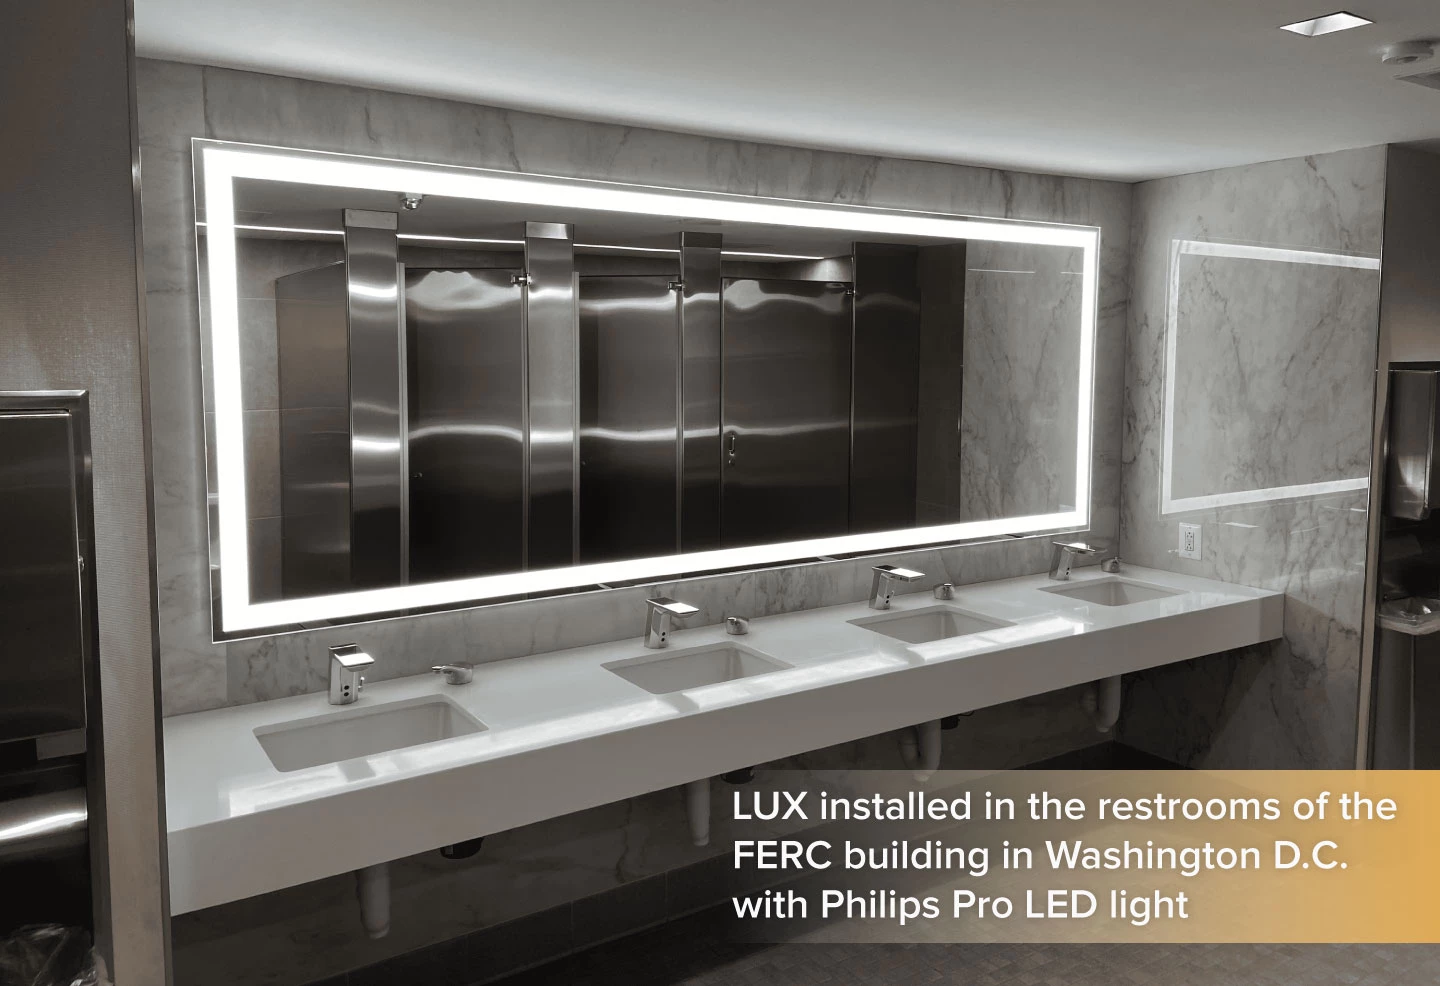 LUX mirror with Phillips Pro LED light installed in a porcelain wall above the sink.